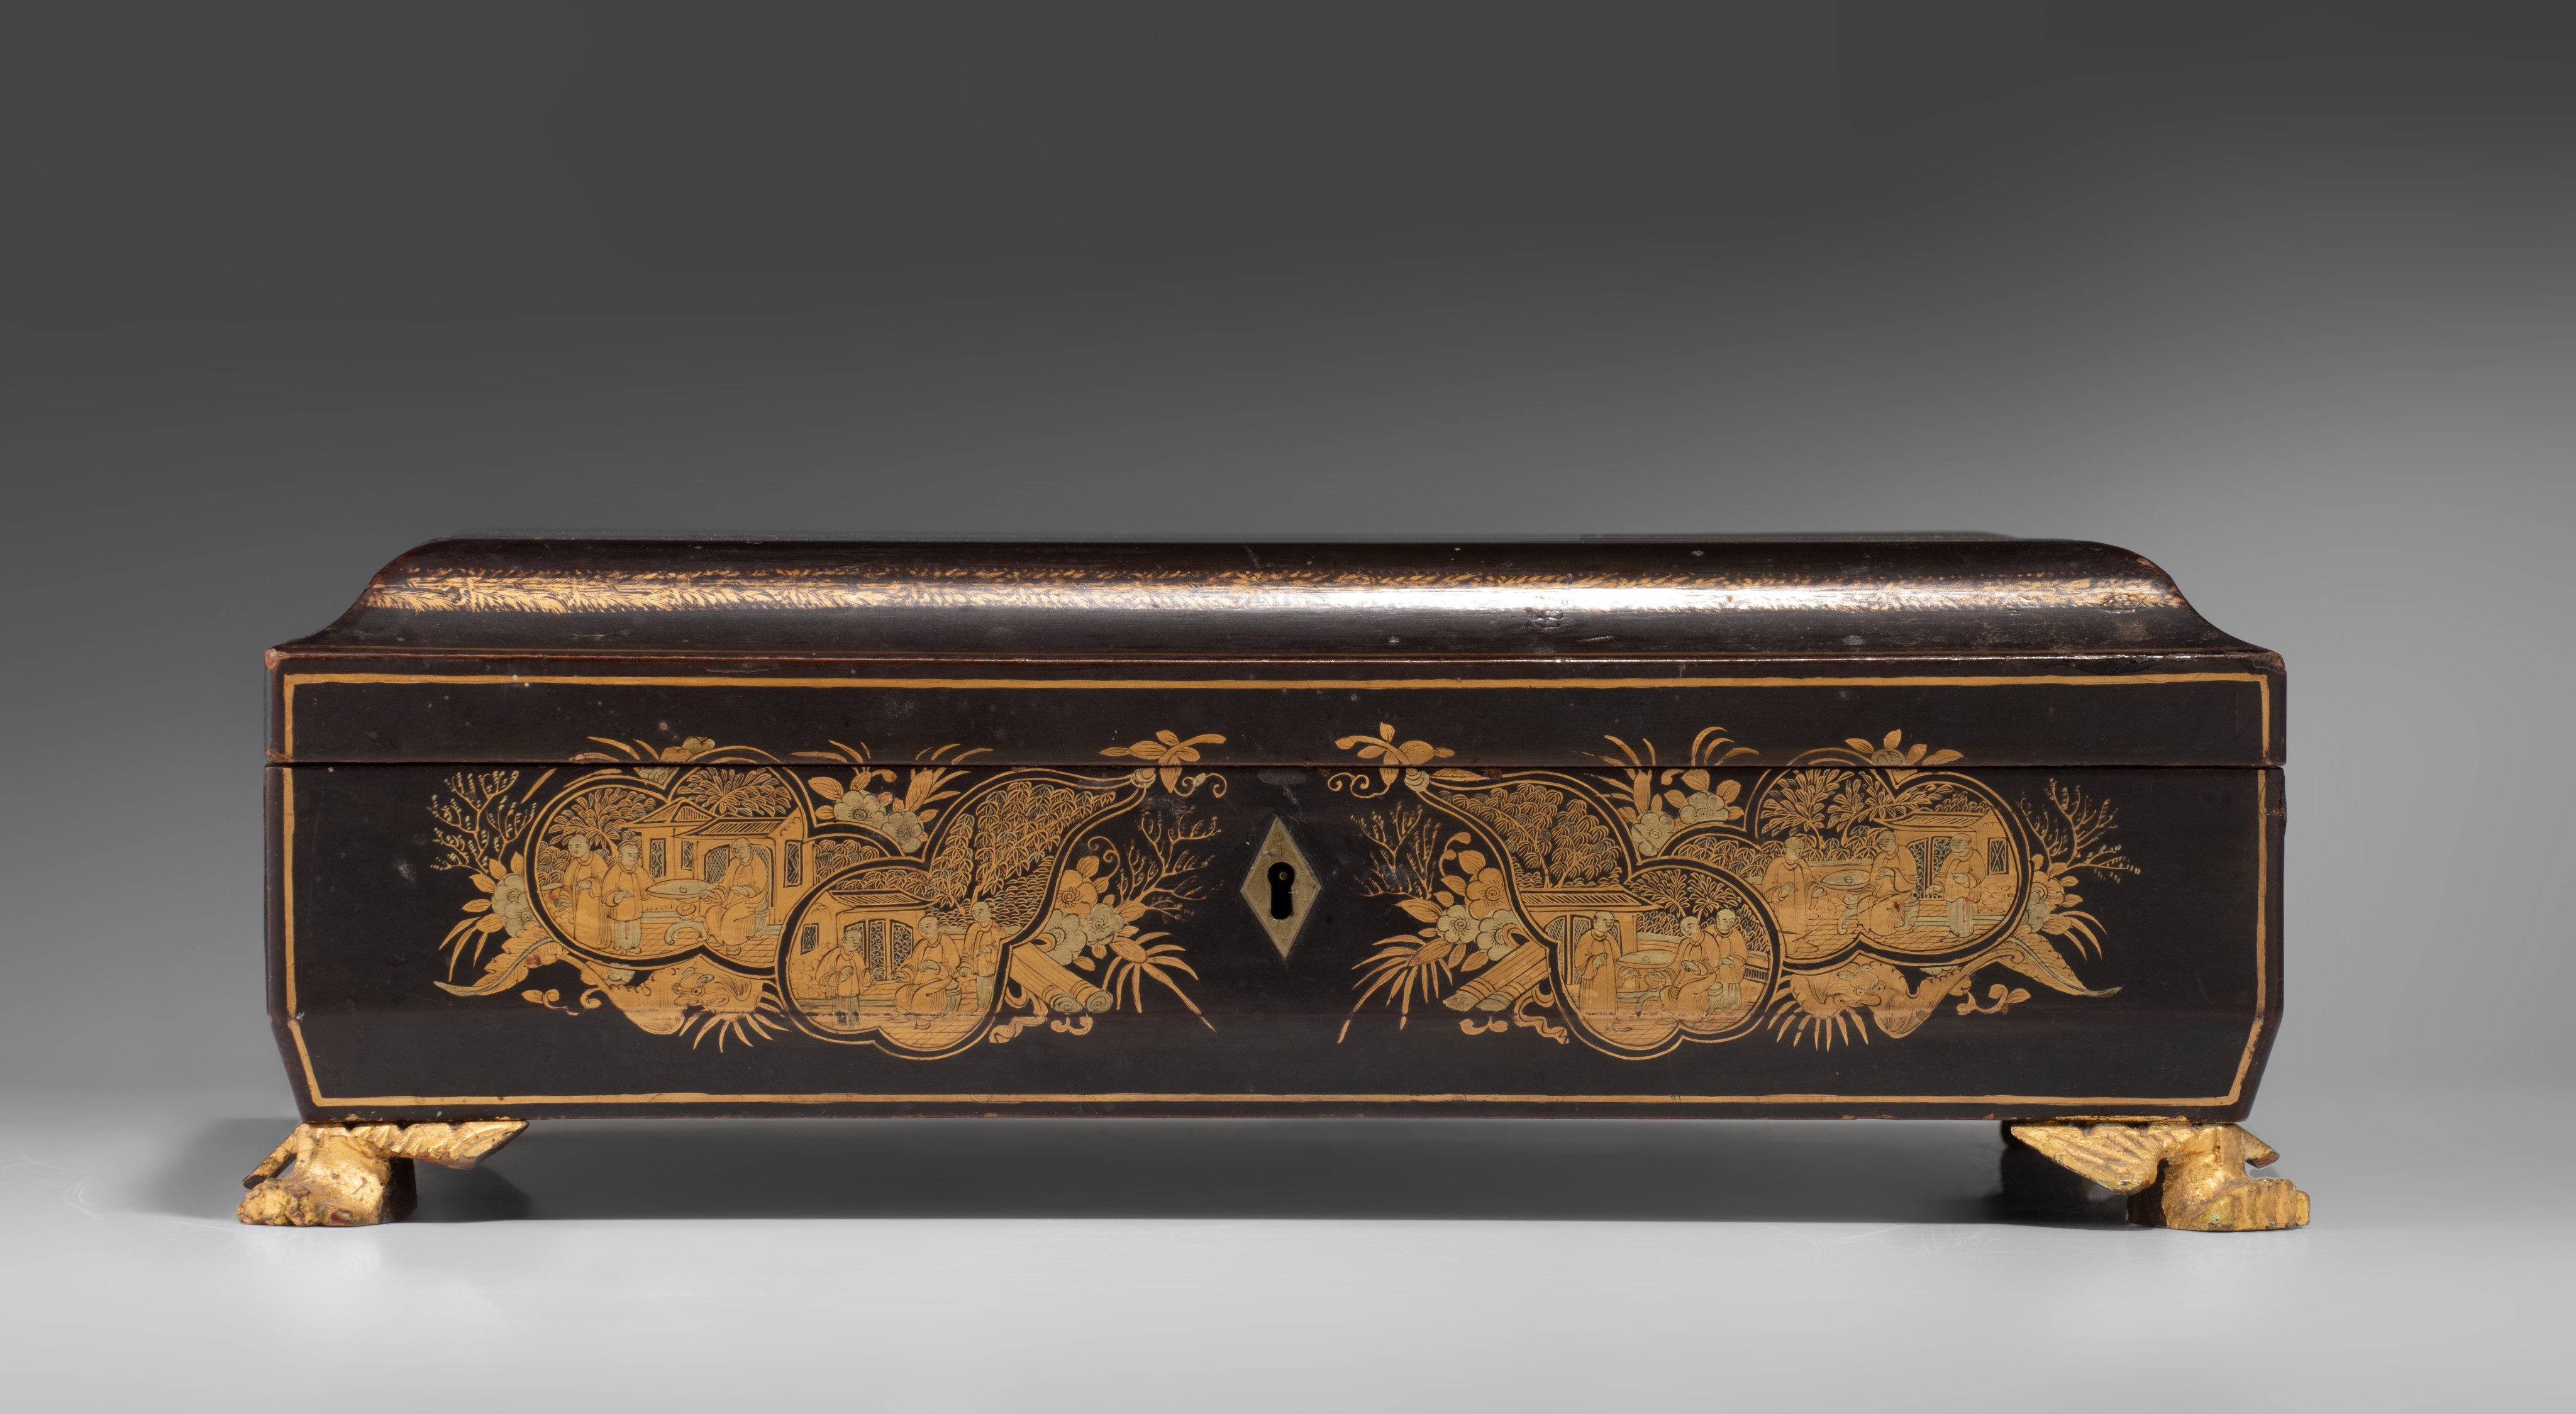 A South-Chinese export gilt and black lacquer game box, 19thC, H 12 - 35 x 30 cm - Image 6 of 10